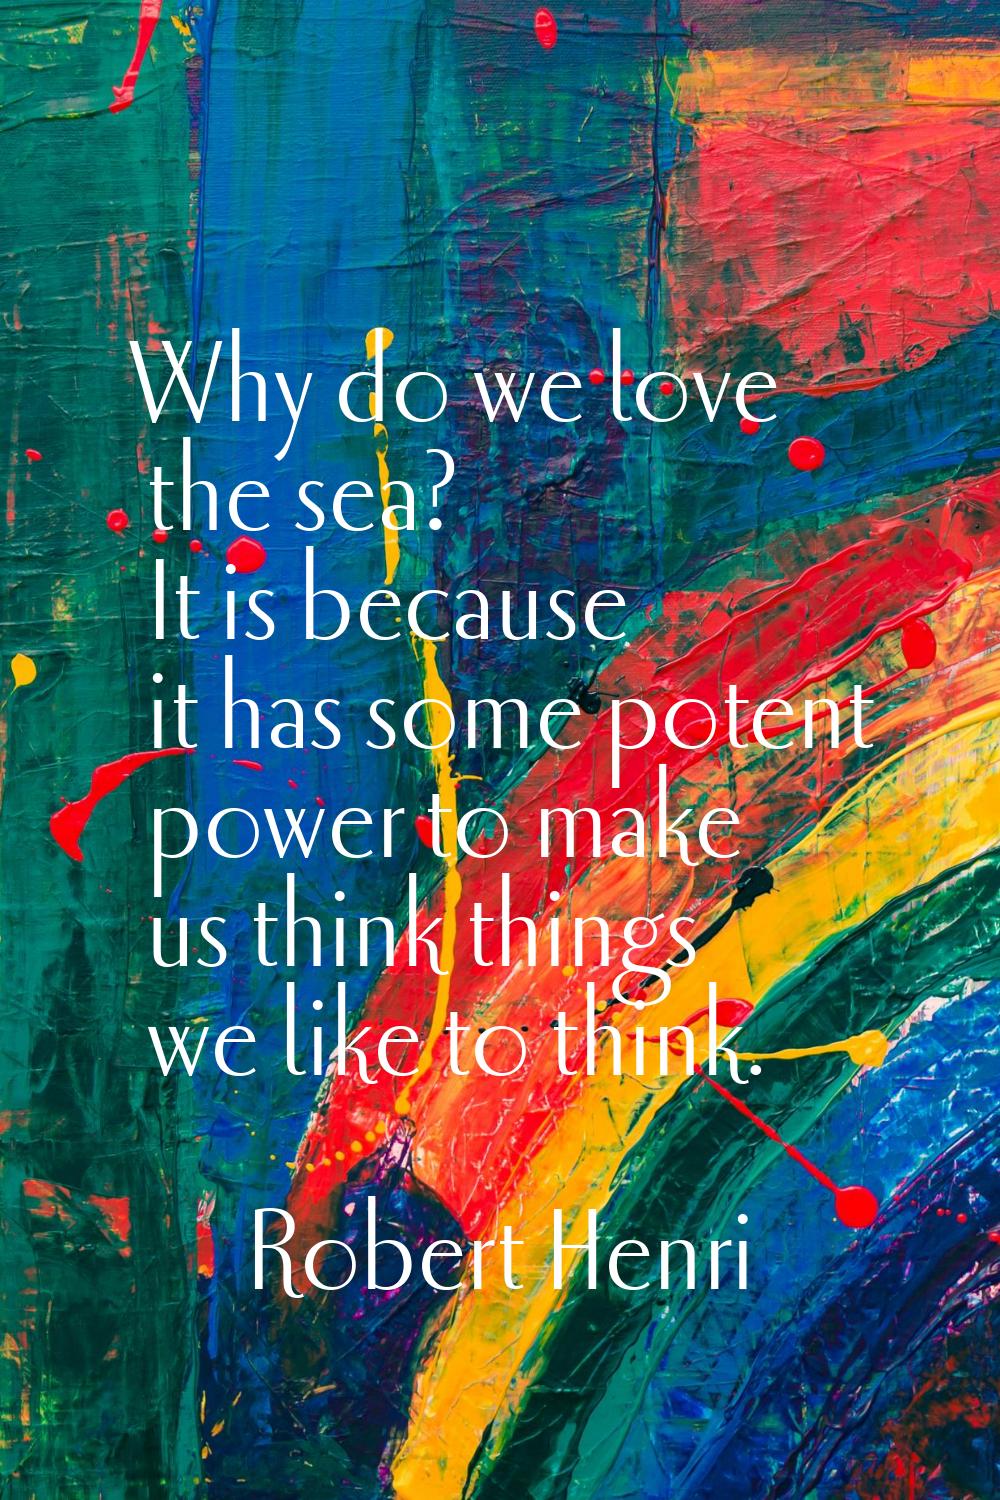 Why do we love the sea? It is because it has some potent power to make us think things we like to t